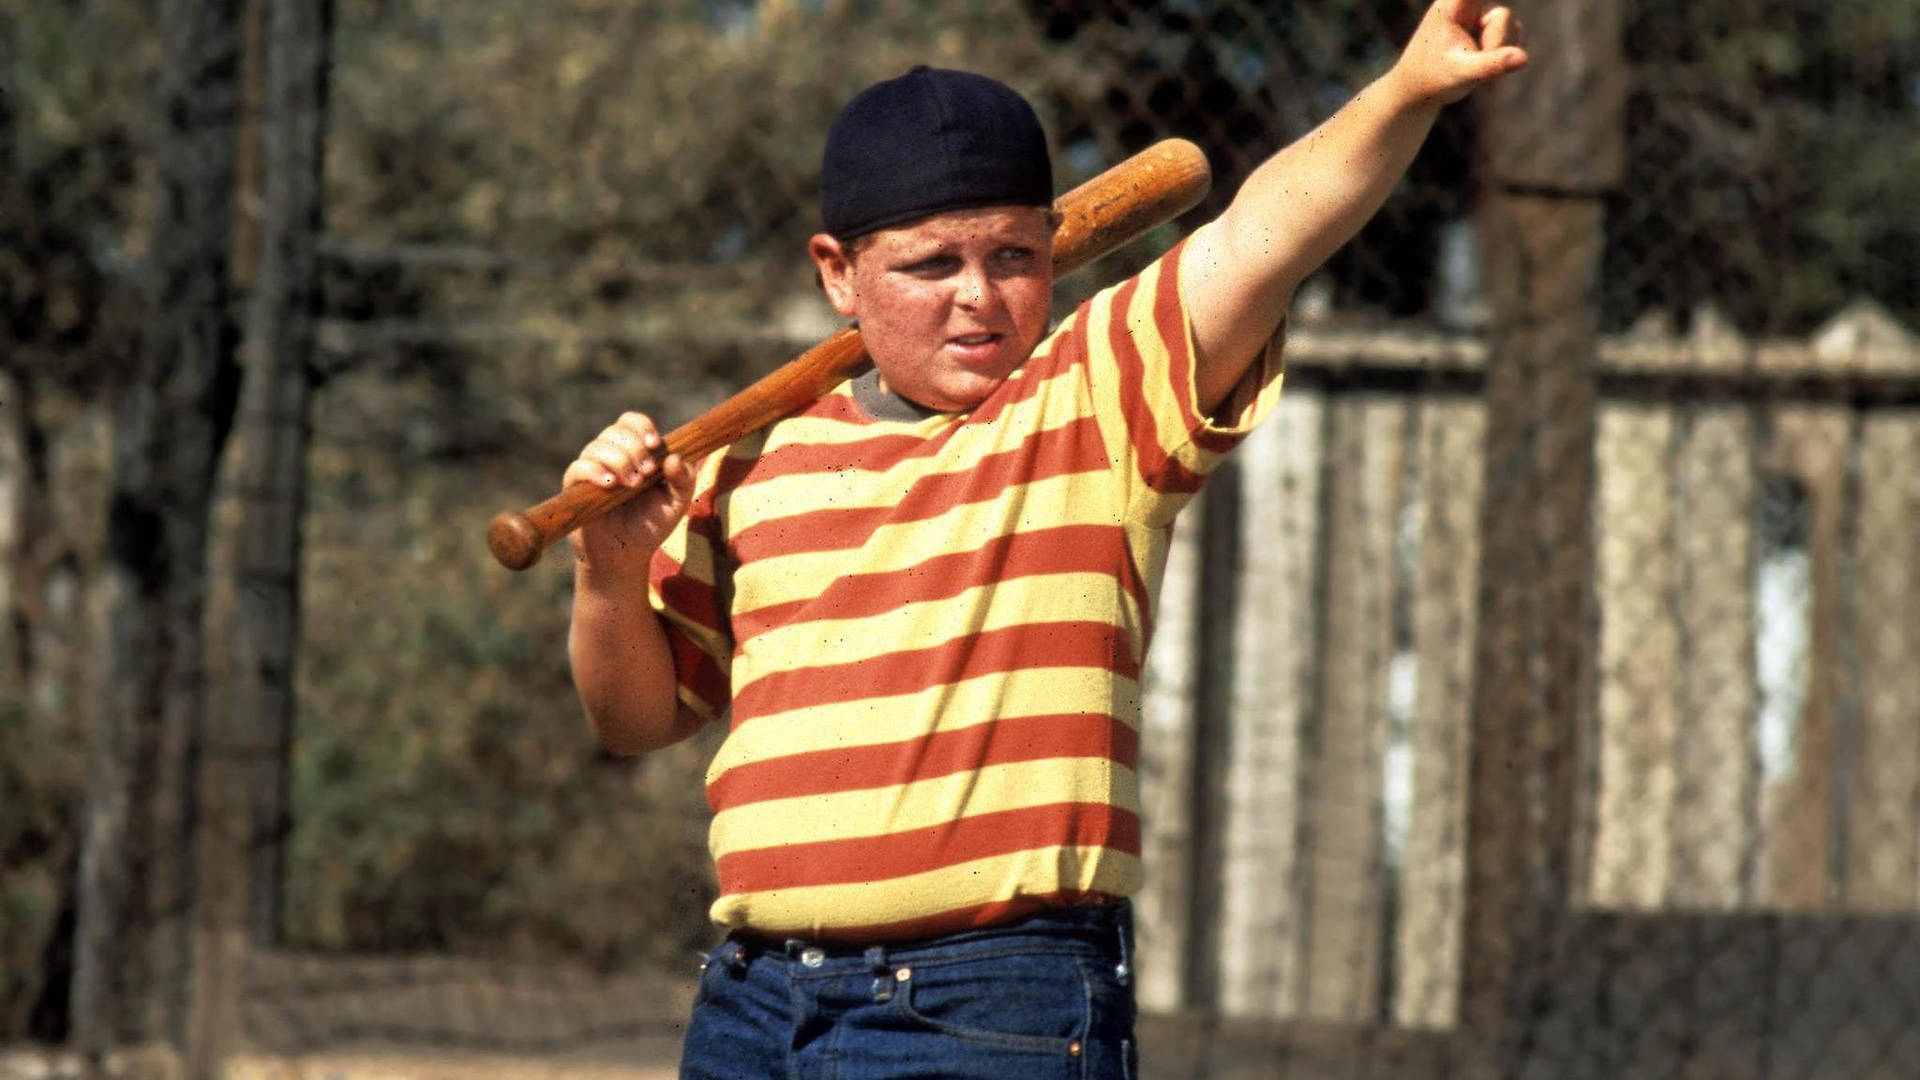 Join the gang! The Sandlot is here! Wallpaper